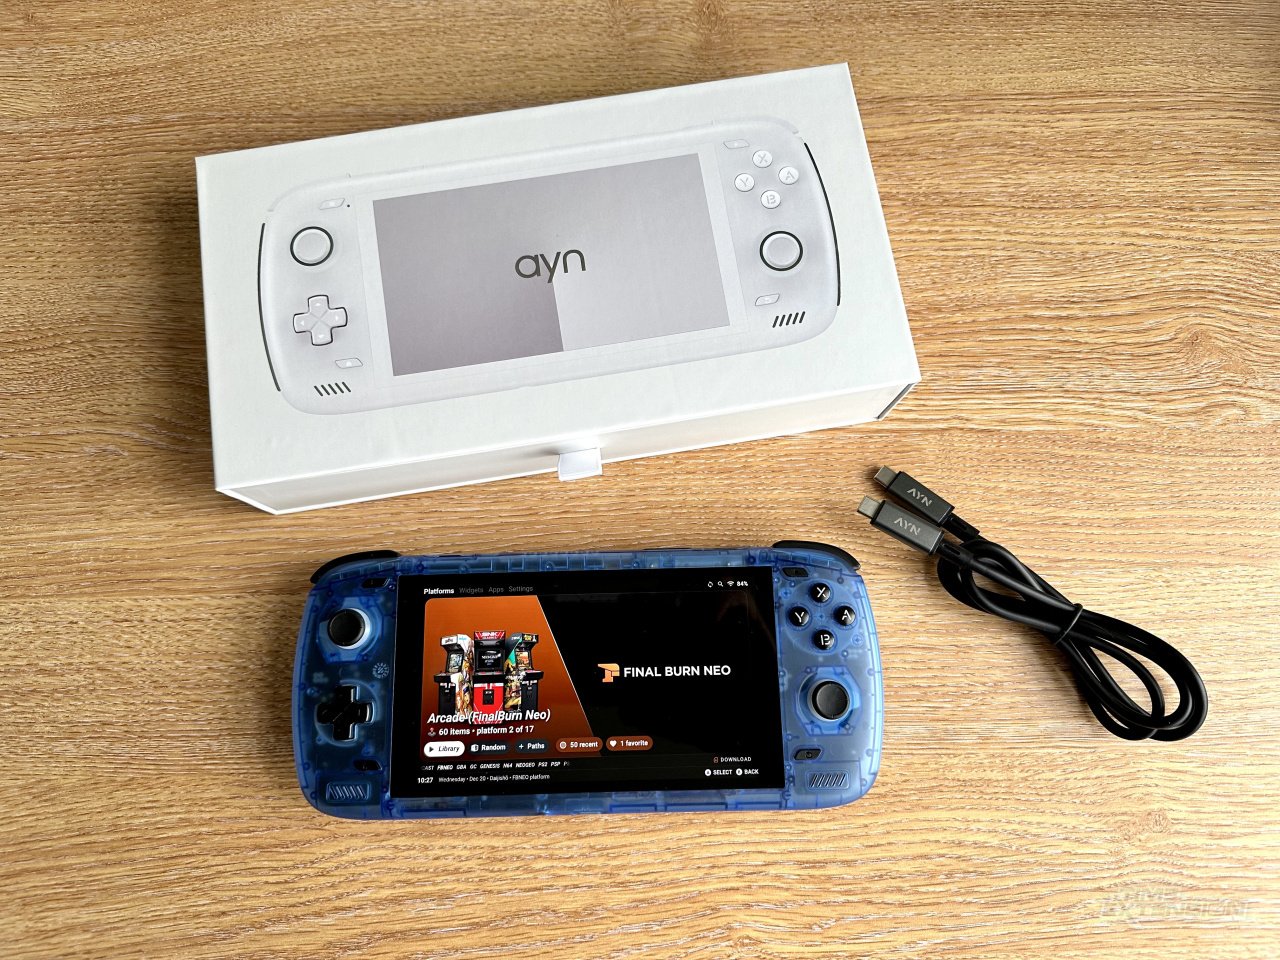 It seems that the Odin Pro is the perfect console to play retro games